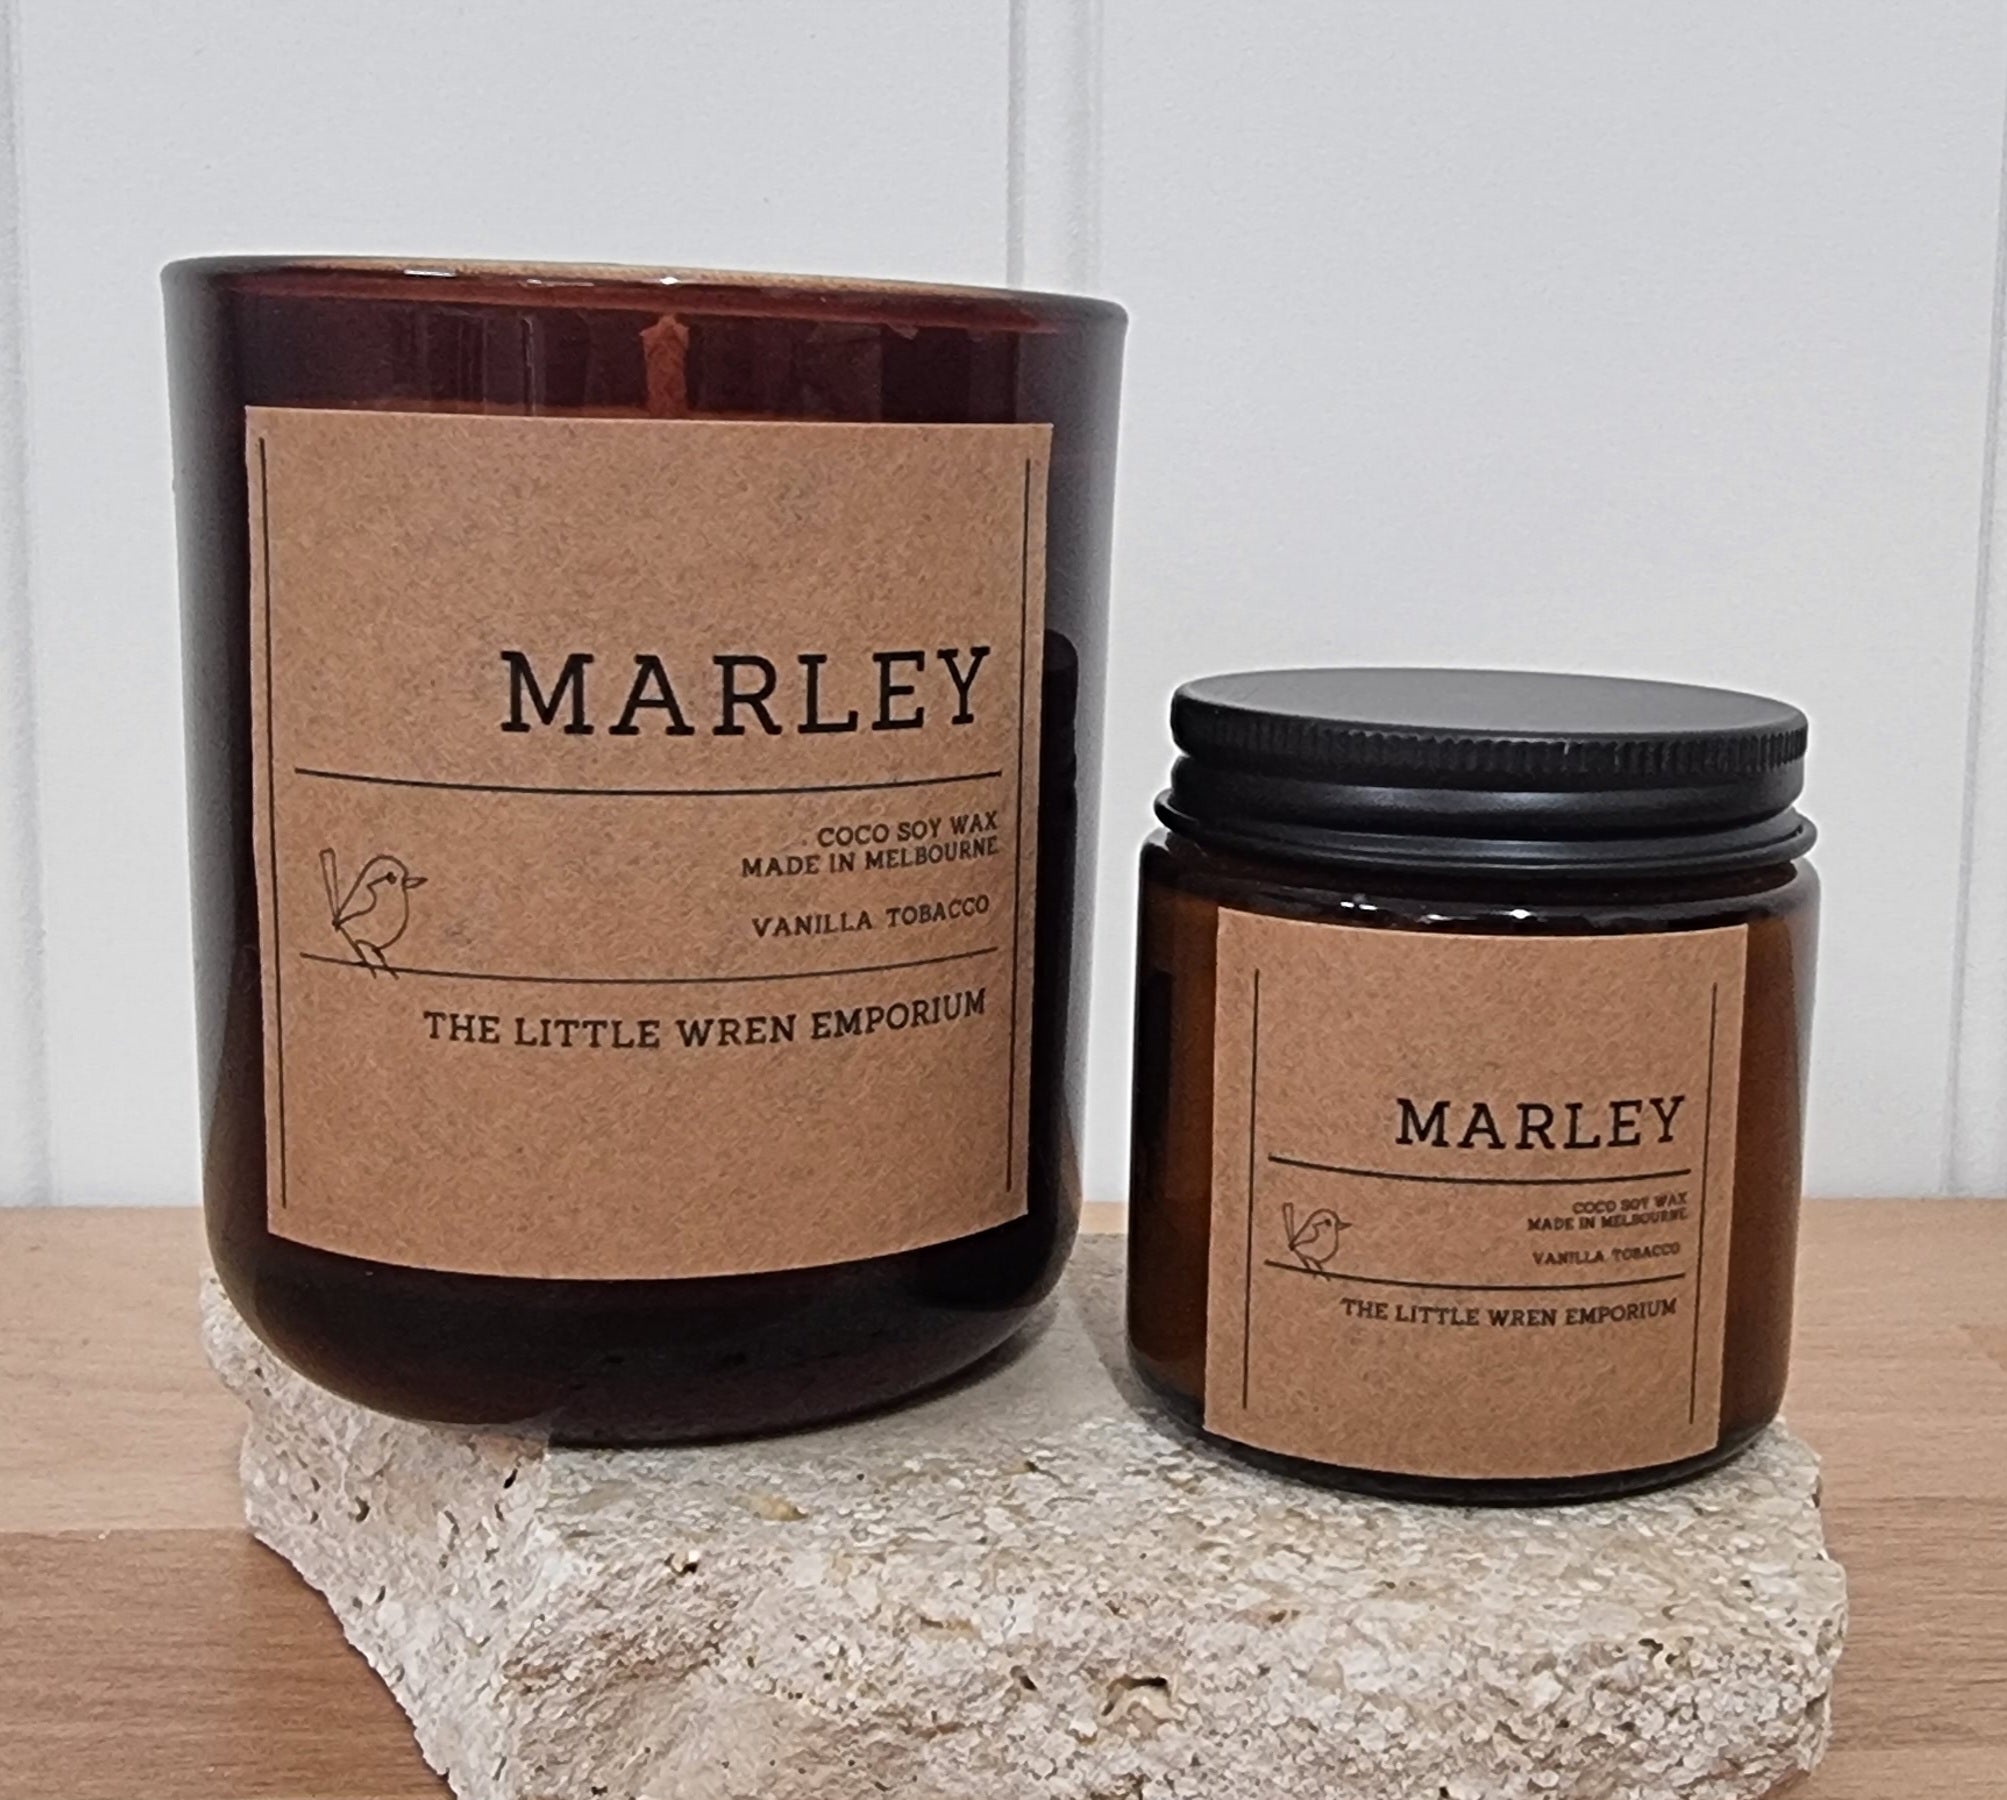 Marley - Hand Poured Coco Soy Candle